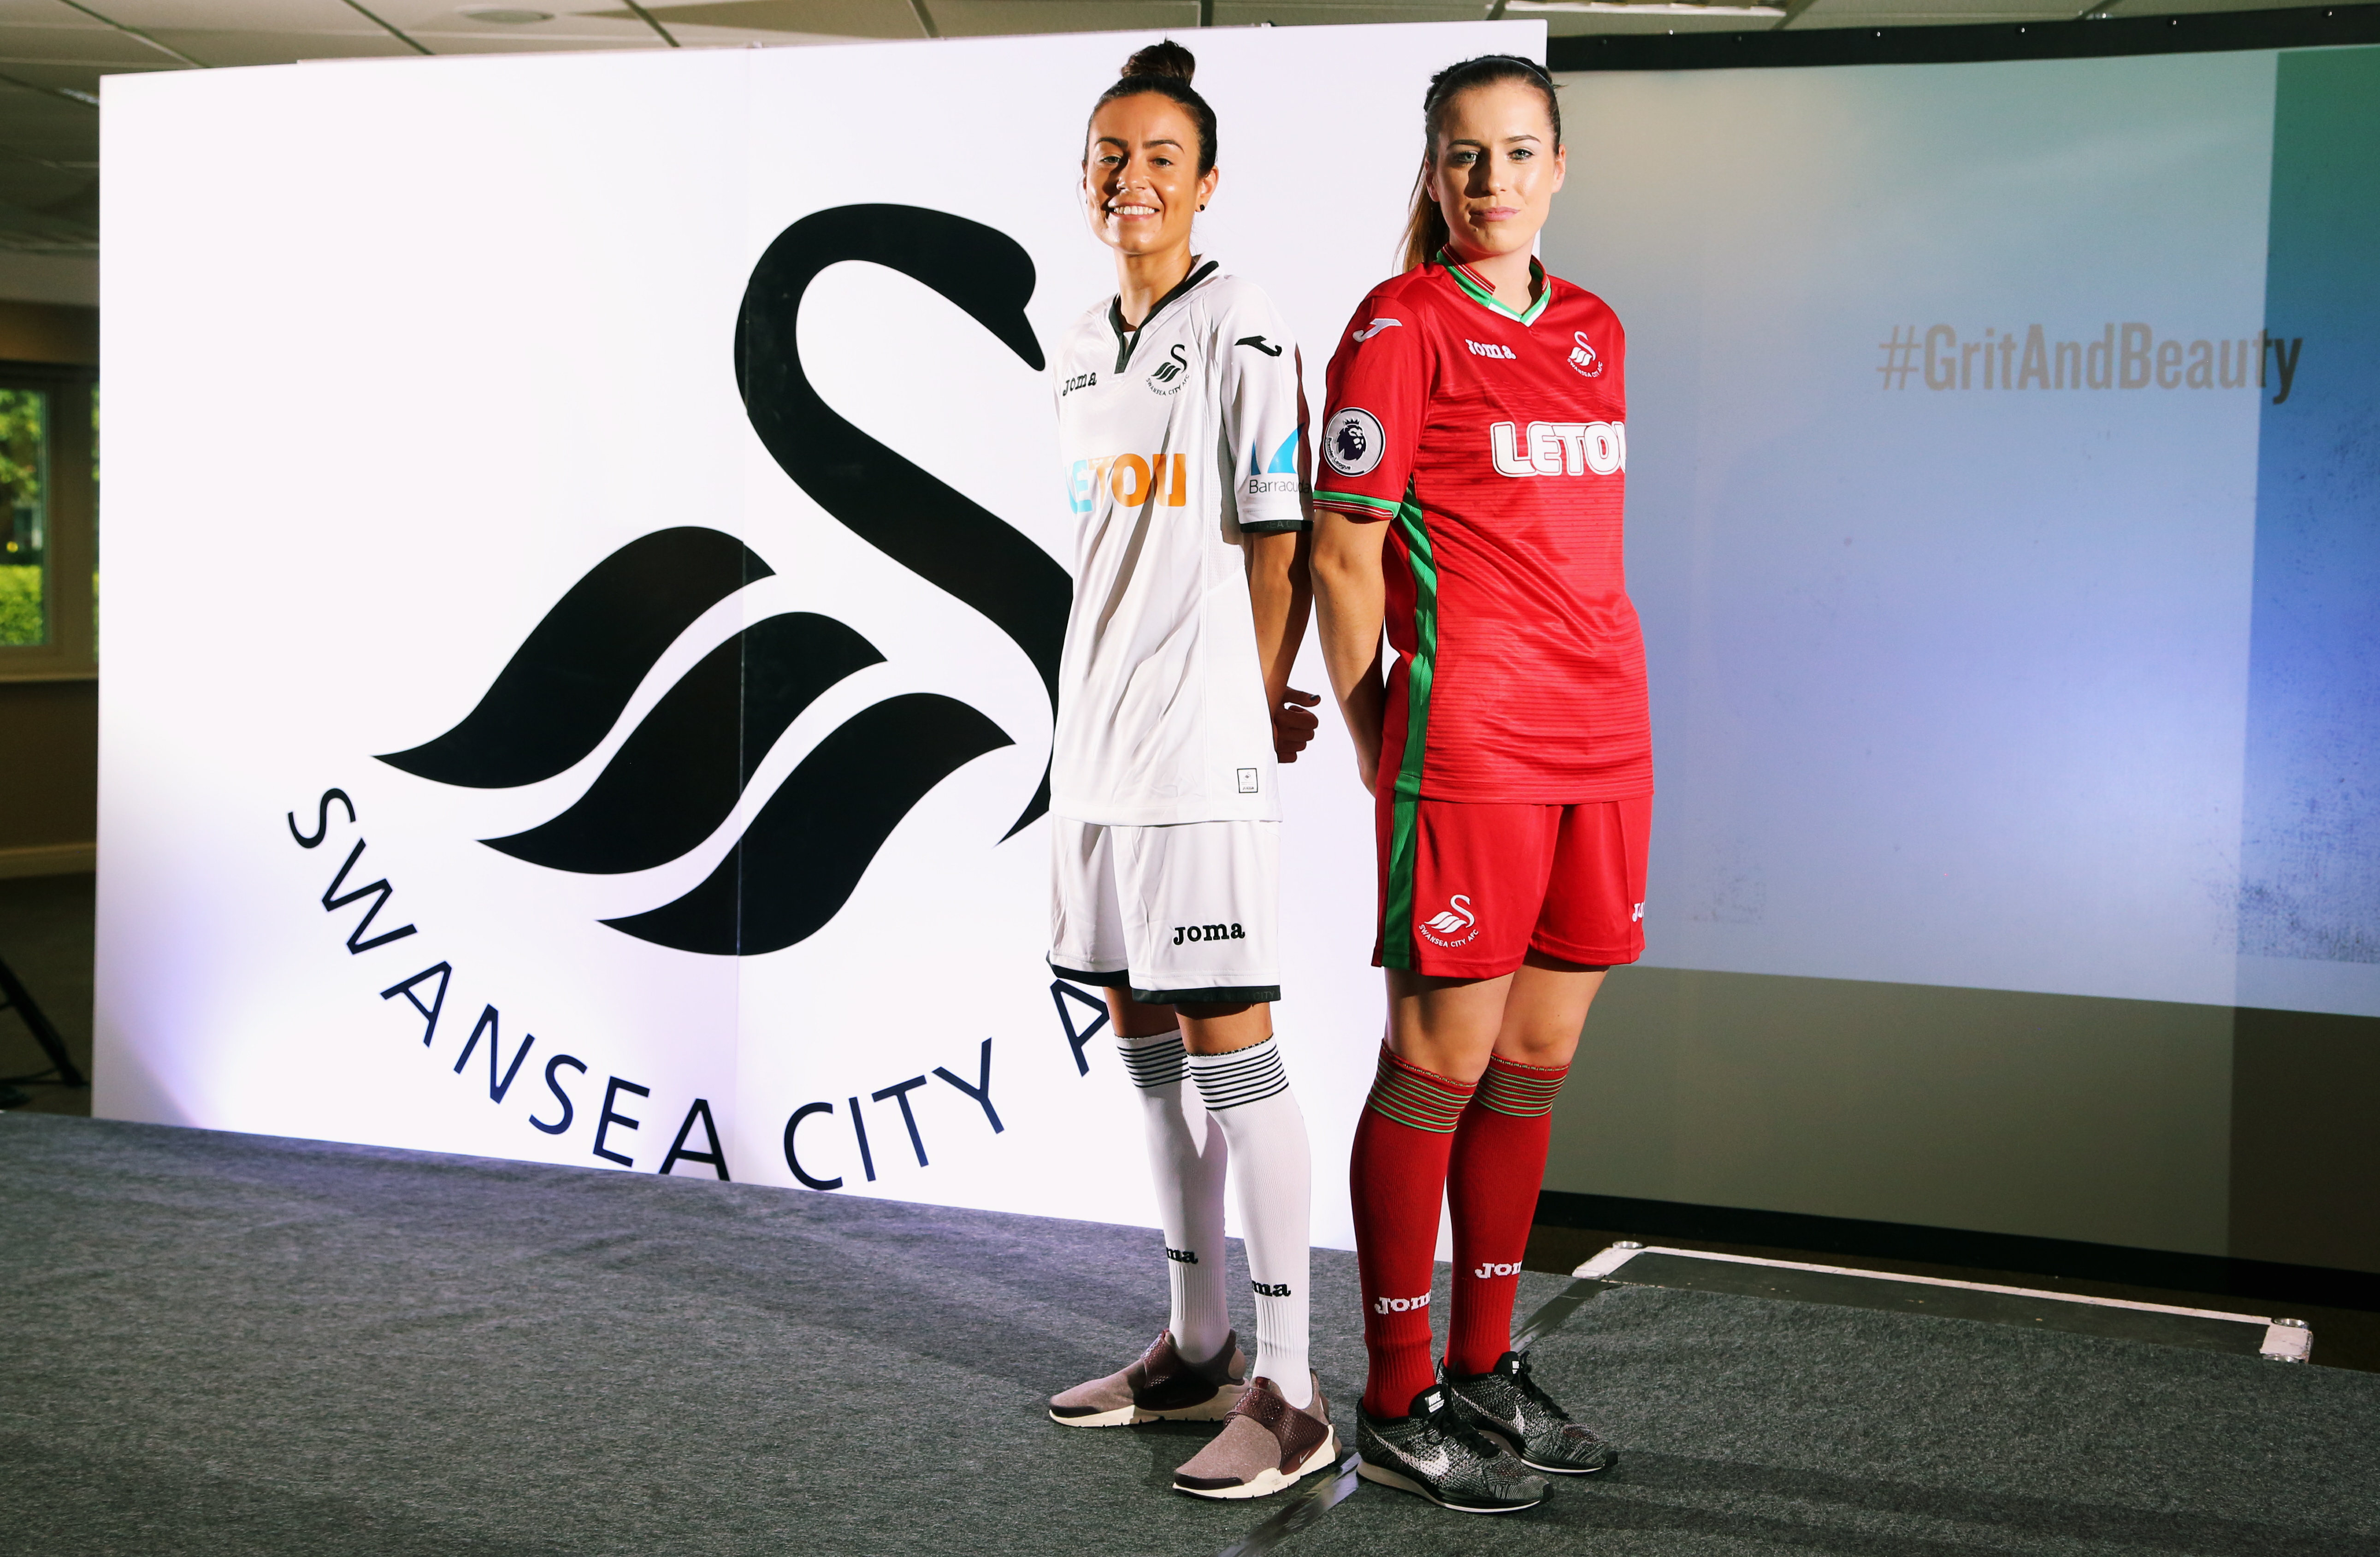 Pictured: Katy Hosford (RED) and Alicia Powe (WHITE) of the Swansea City FC Ladies' team model the home and away kits. Monday 19 June 2017 Re: Swansea City FC launch their new home and away kits and announce Letou as their new sponsor at the Liberty Stadium, Swansea, Wales, UK.